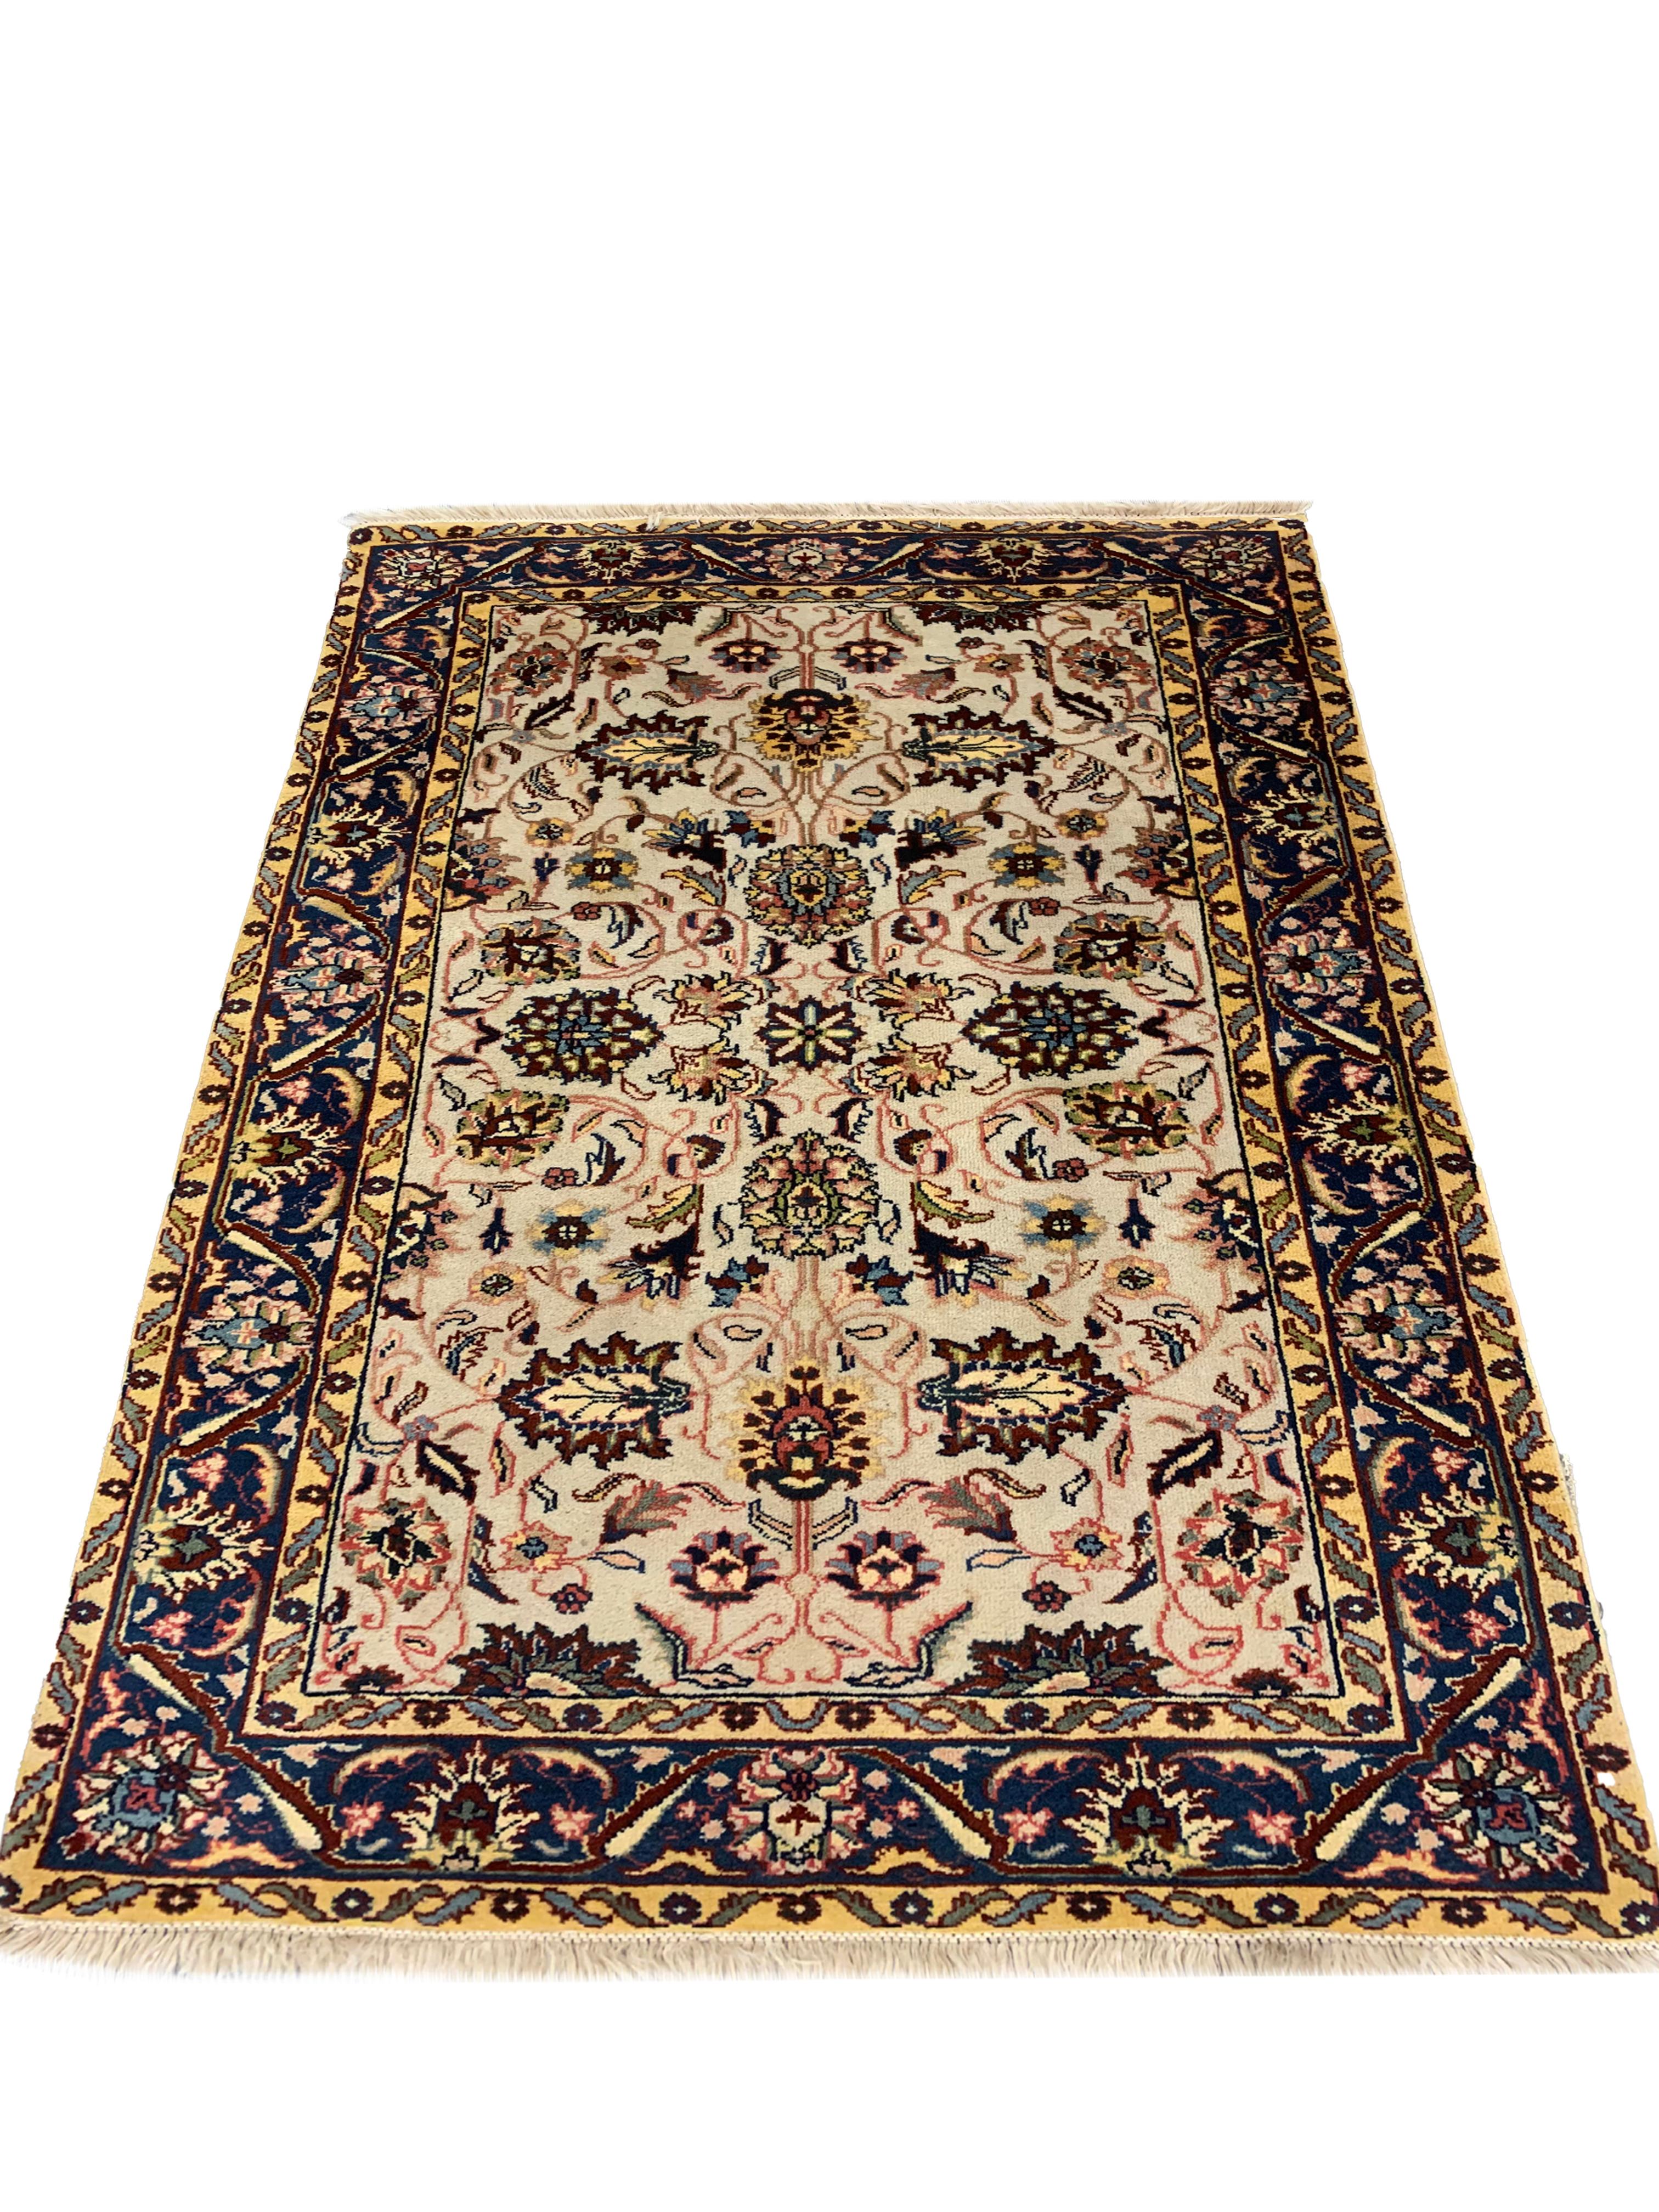 This fine wool area rug is an excellent example of rugs woven by hand in India. This vintage rug features a traditional Indian design featuring a symmetrical floral design woven in accents of yellow, red, blue and green. Both the colour palette and